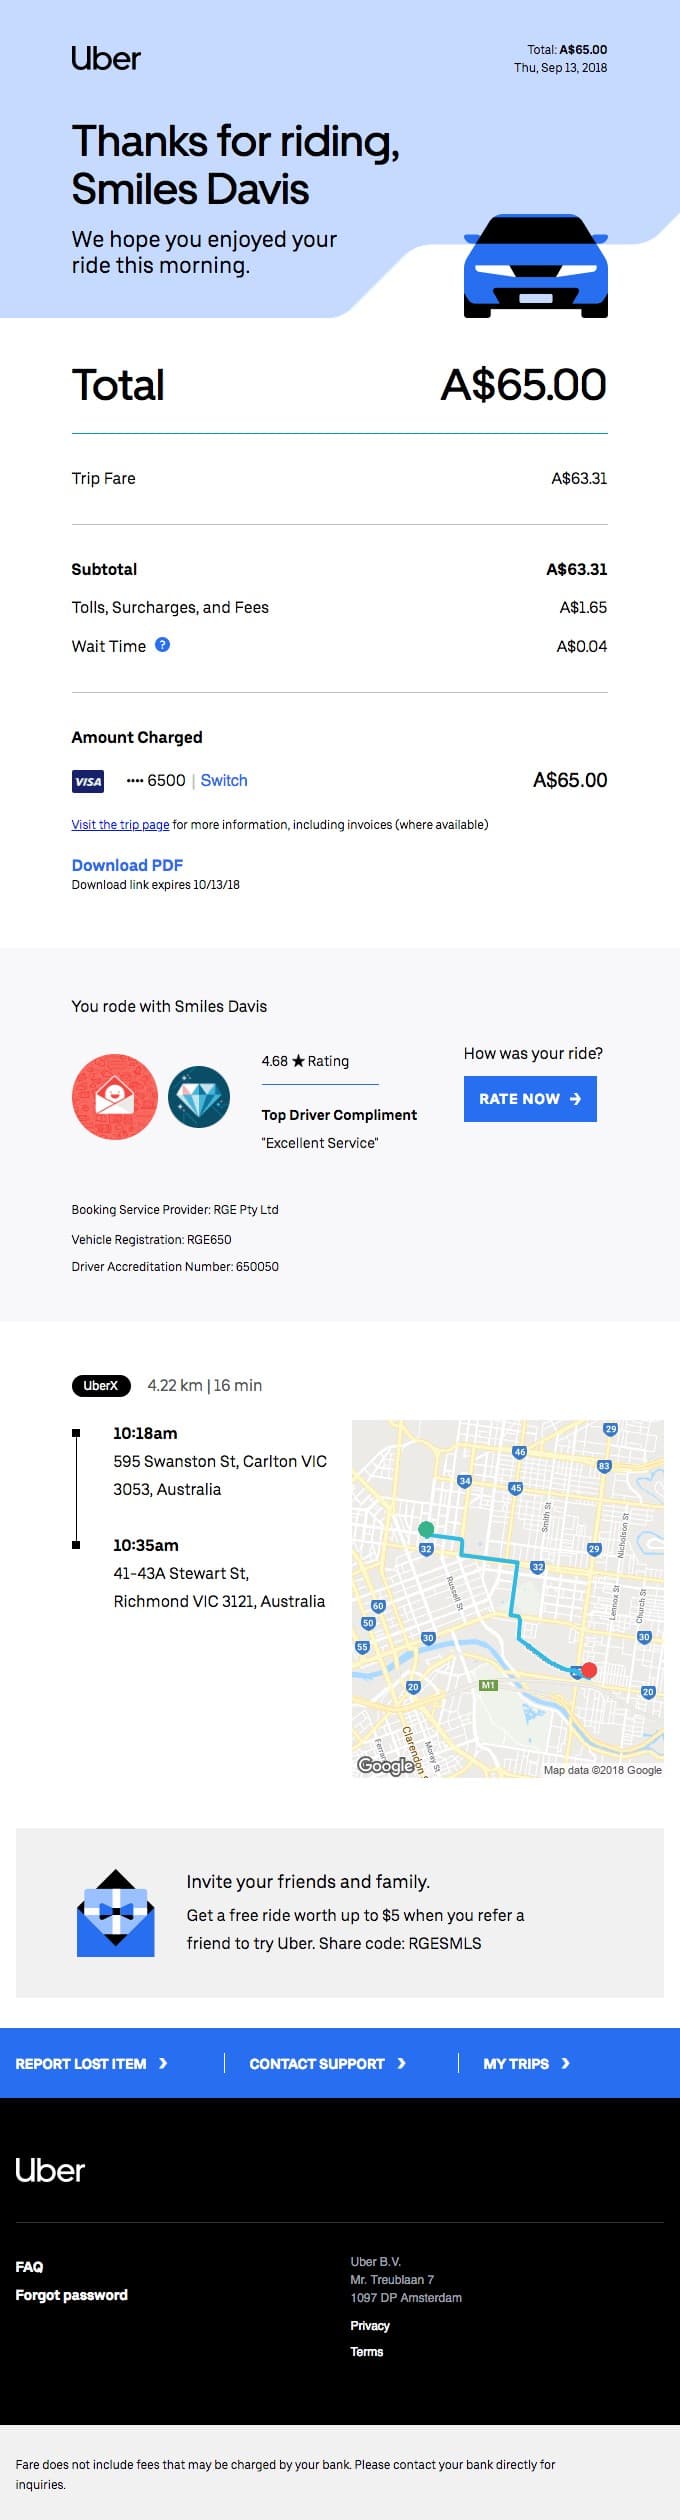 Take this confirmation email from Uber. The company clearly displays what the transaction was: a trip from a driver that resulted in a $65.00 charge to the customer’s email, along with the entire route and driver information.